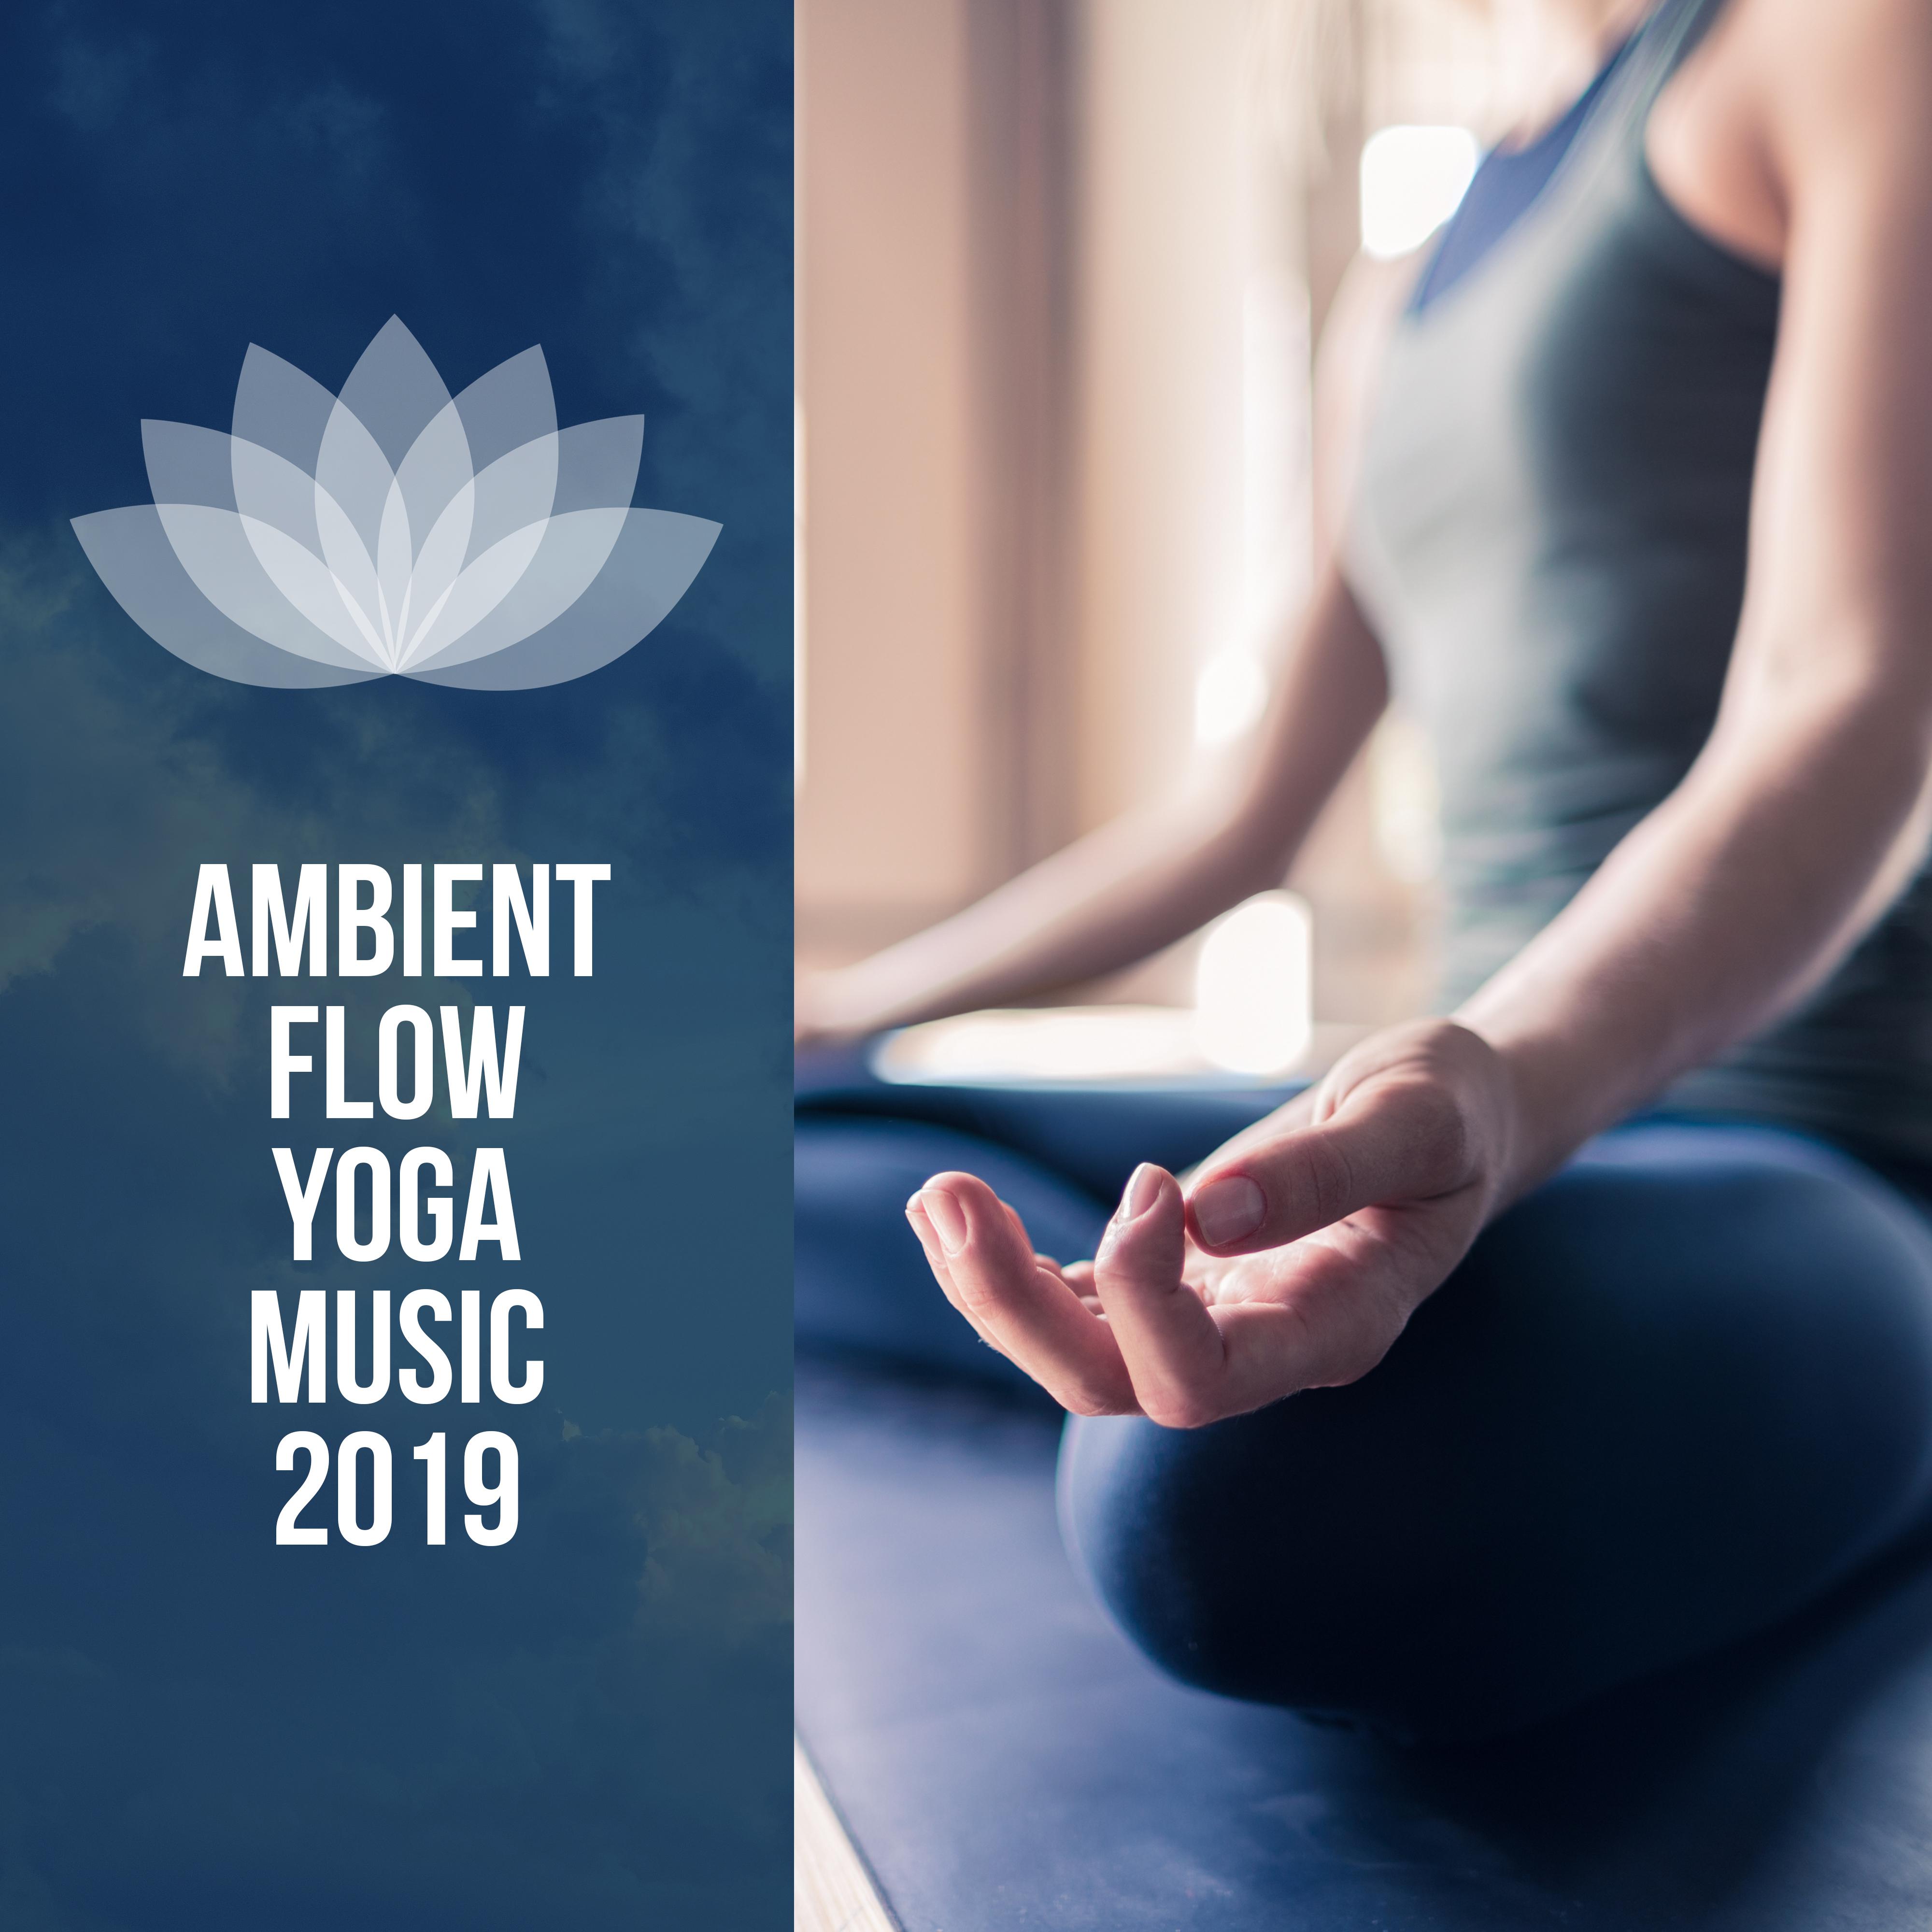 Ambient Flow Yoga Music 2019